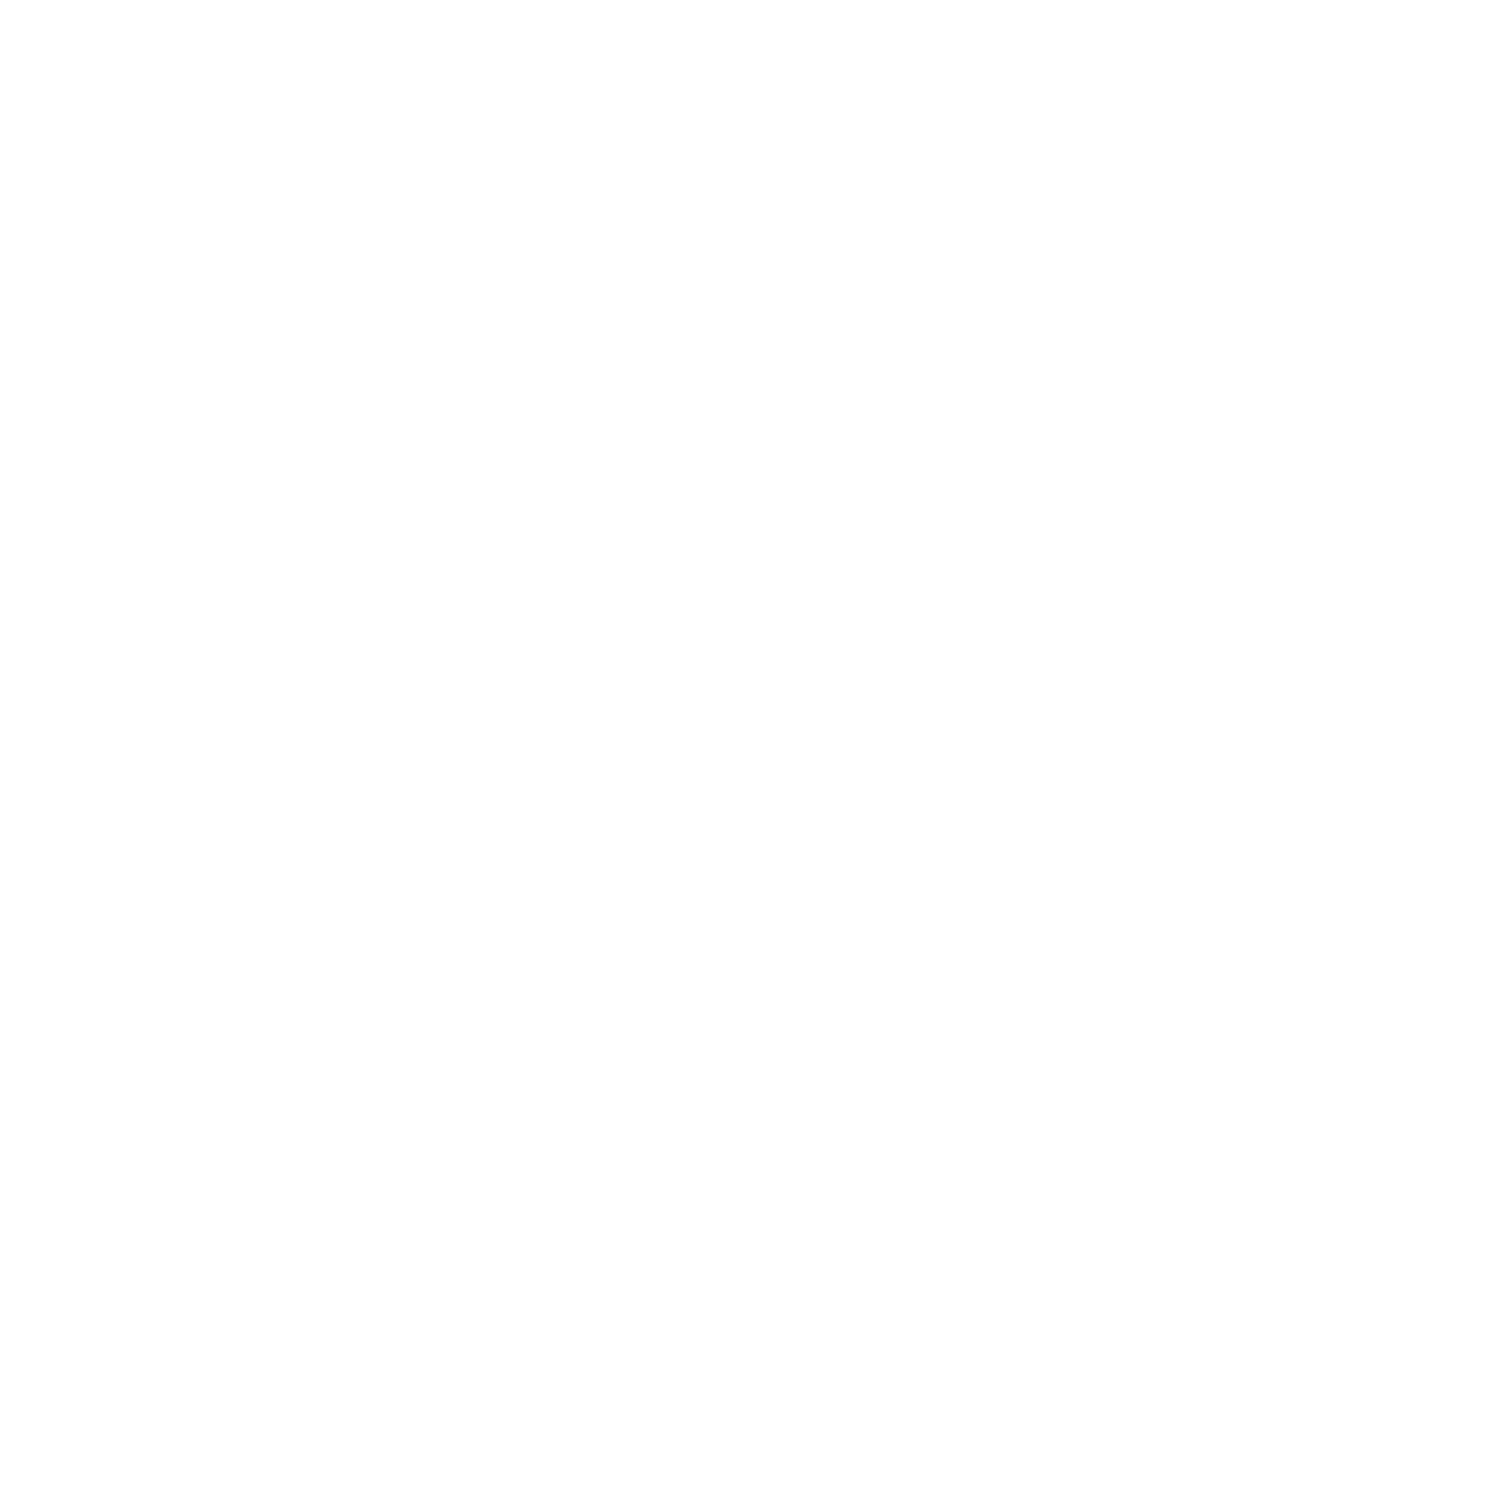 REVIVAL productions